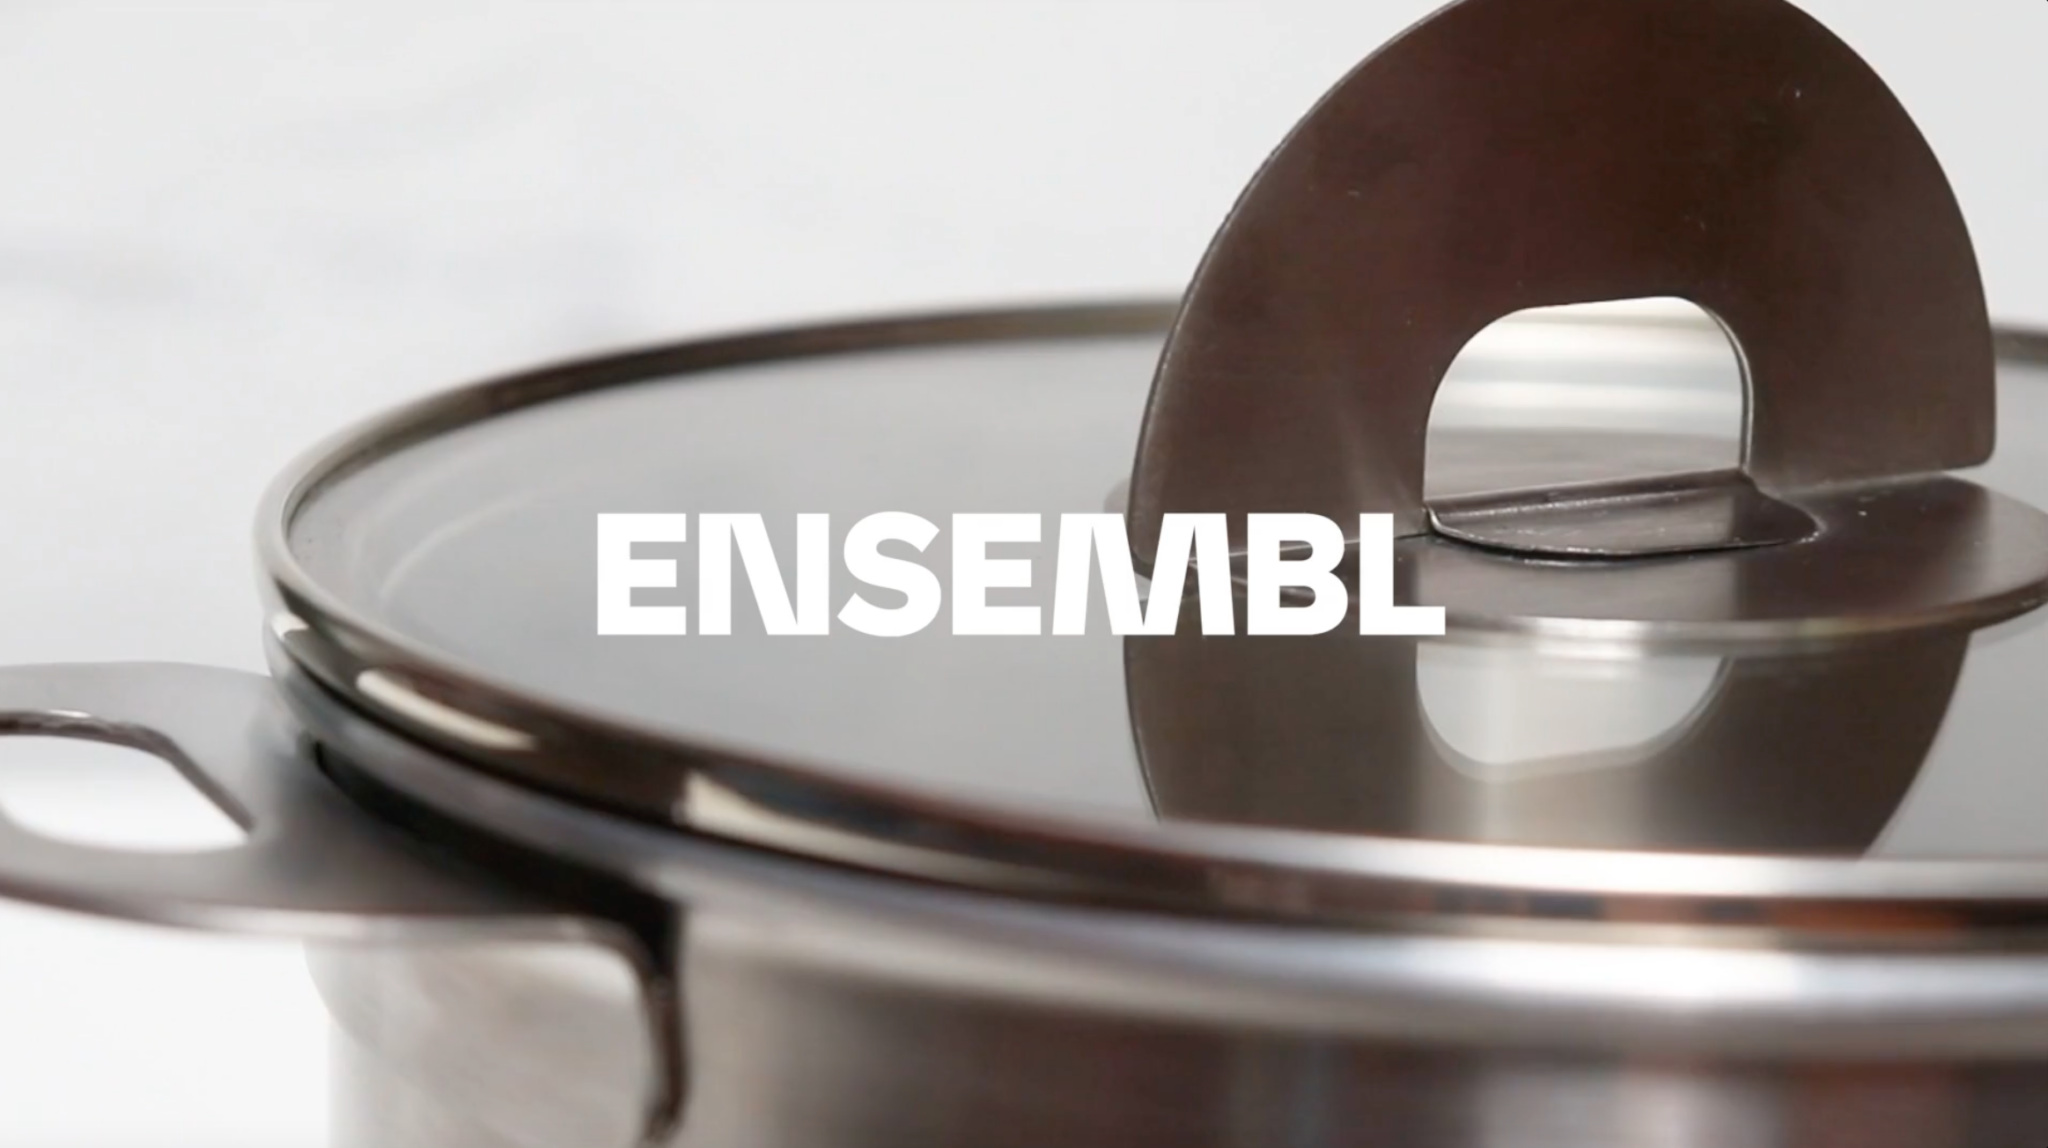 LEARN MORE about ENSEMBL Stainless Steel Fully Clad Stacking Cookware Set with removable handles. ENSEMBL's latest video showcases how Stackware's multifunctional capabilities elevates the modern kitchen. Watch now. Frying Pan, Braiser Pan, Small Saucepan, Medium Saucepan, Stockpot, Steamer/Colander. Multifunctional, long-lasting, design-forward home wares. Oven-safe cookware set. Induction-safe cookware set.